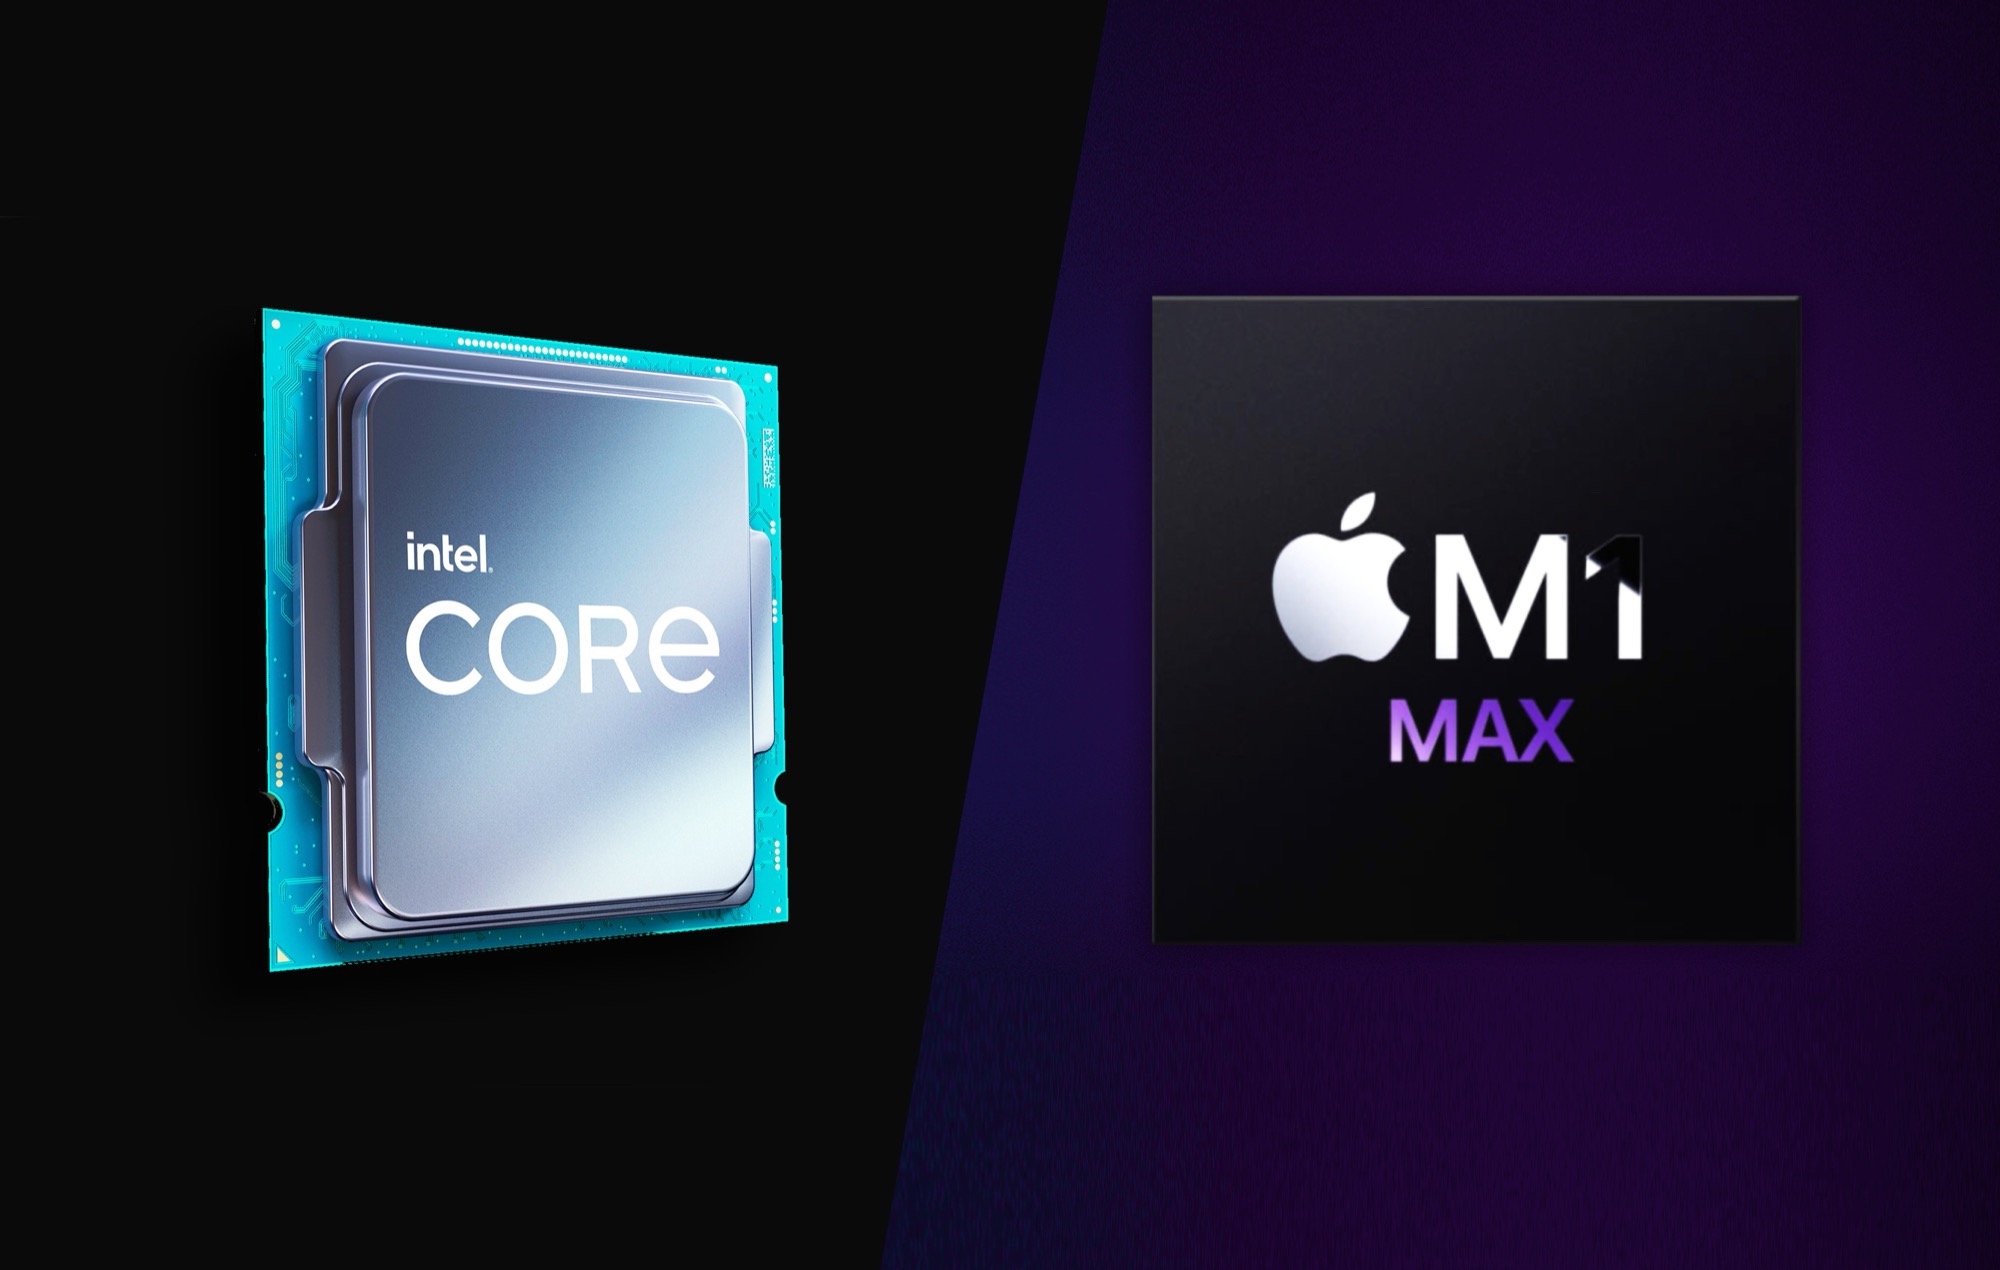 Intel's new processor outperforms Apple's M1 Max chip